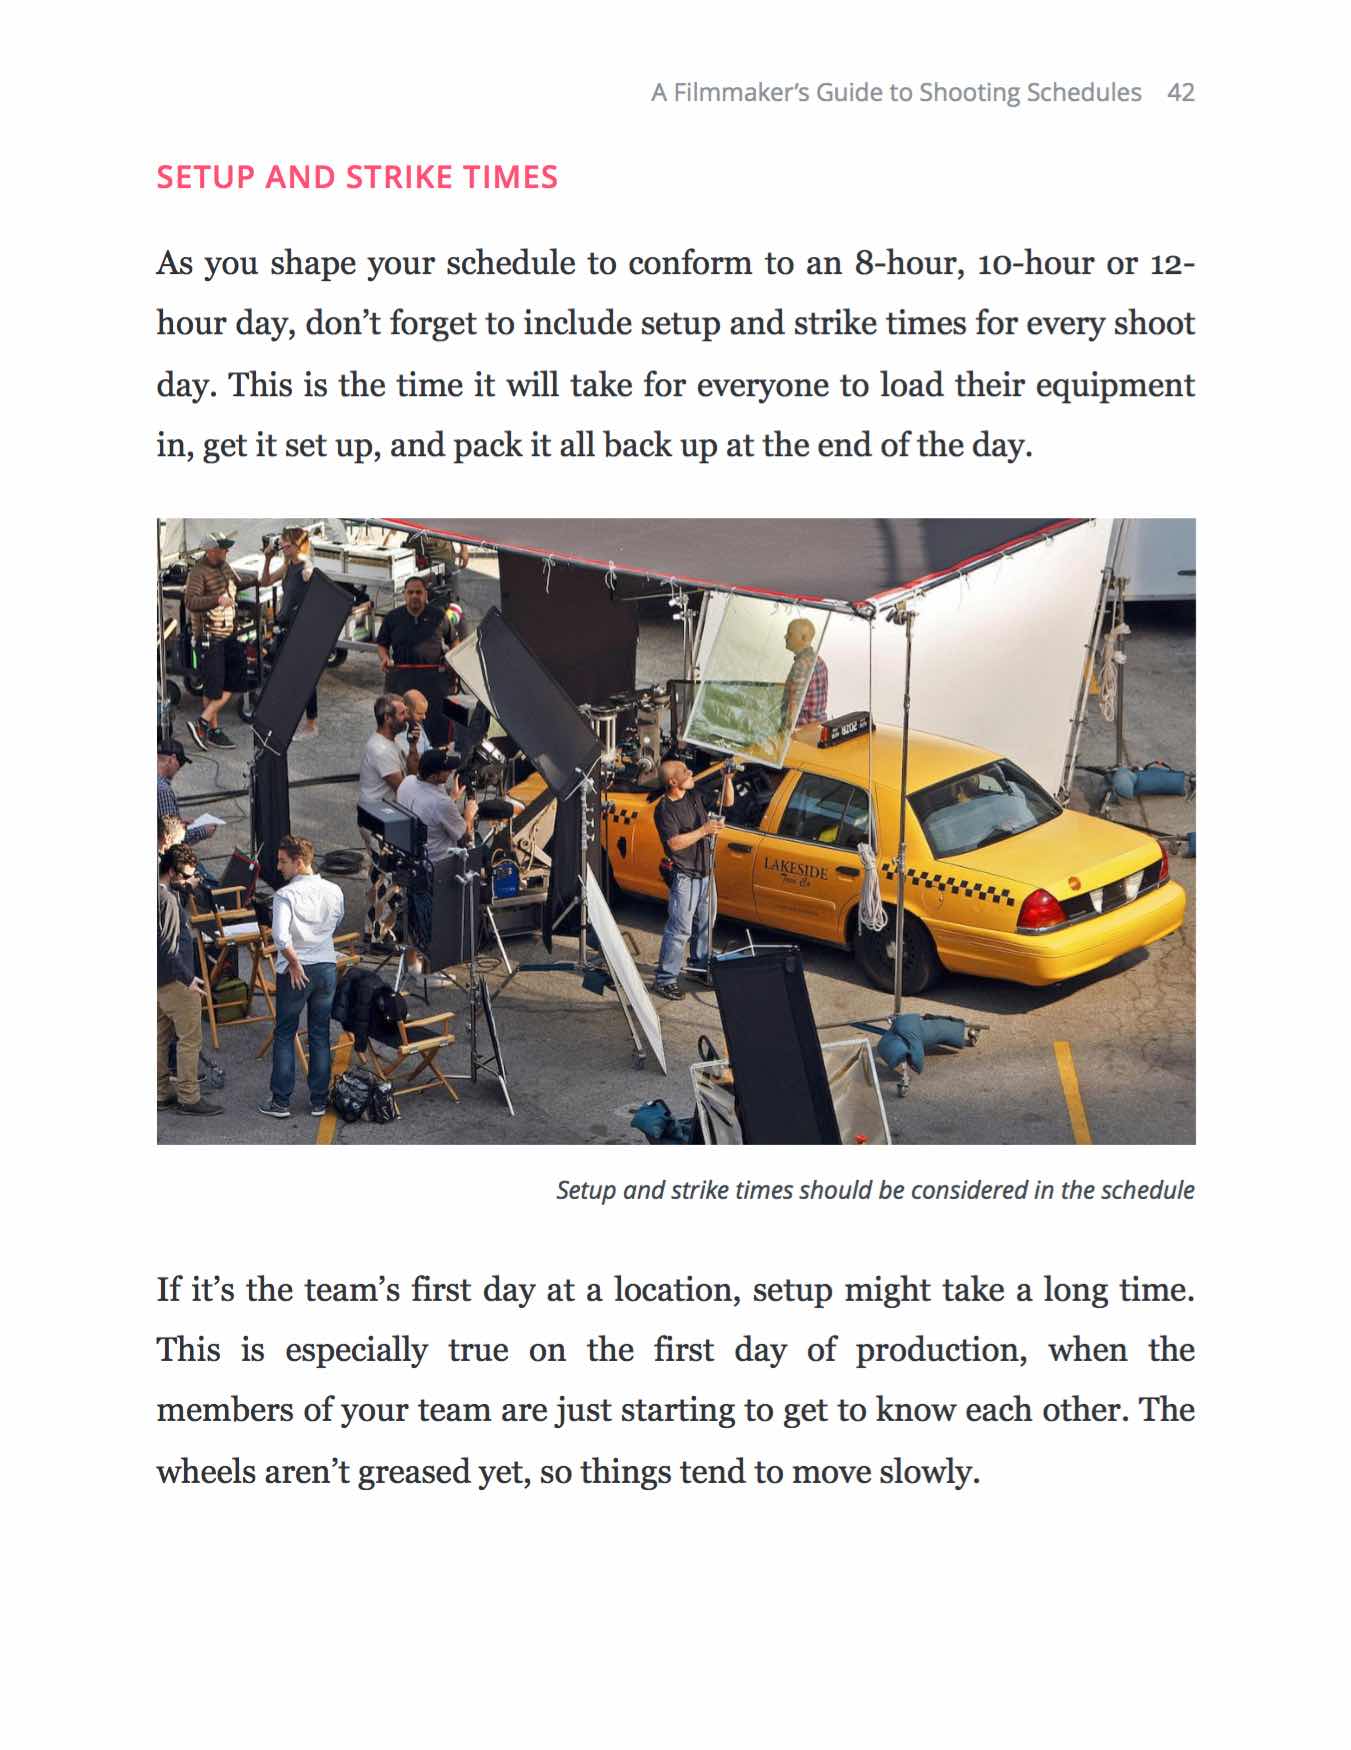 A Filmmakers Guide to Shooting Schedules - Page-42 Free Ebook - StudioBinder